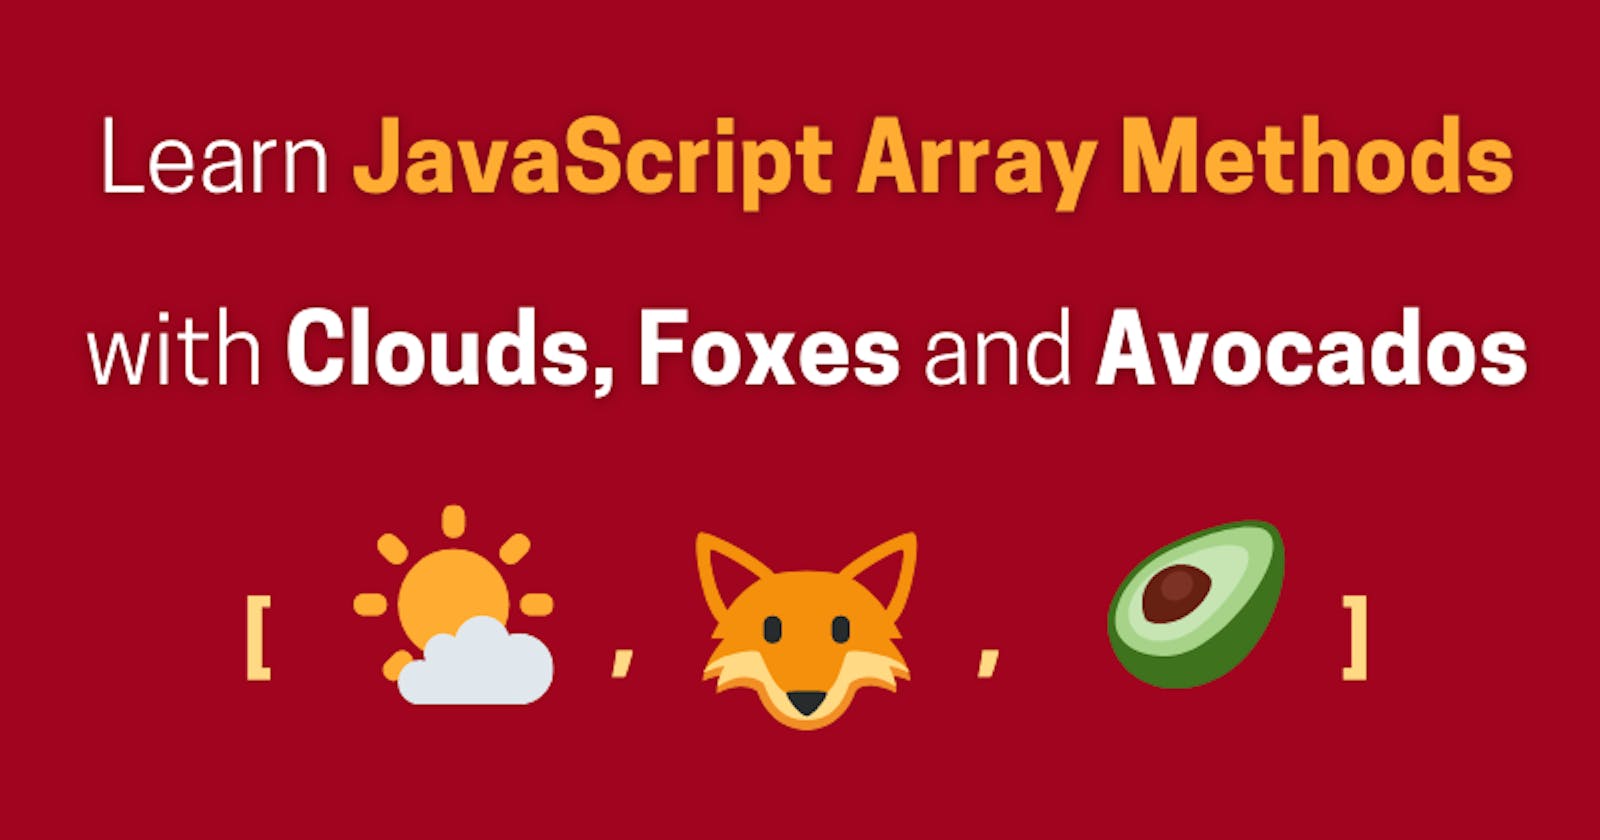 Learn JavaScript Array Methods With Clouds, Foxes and Avocados